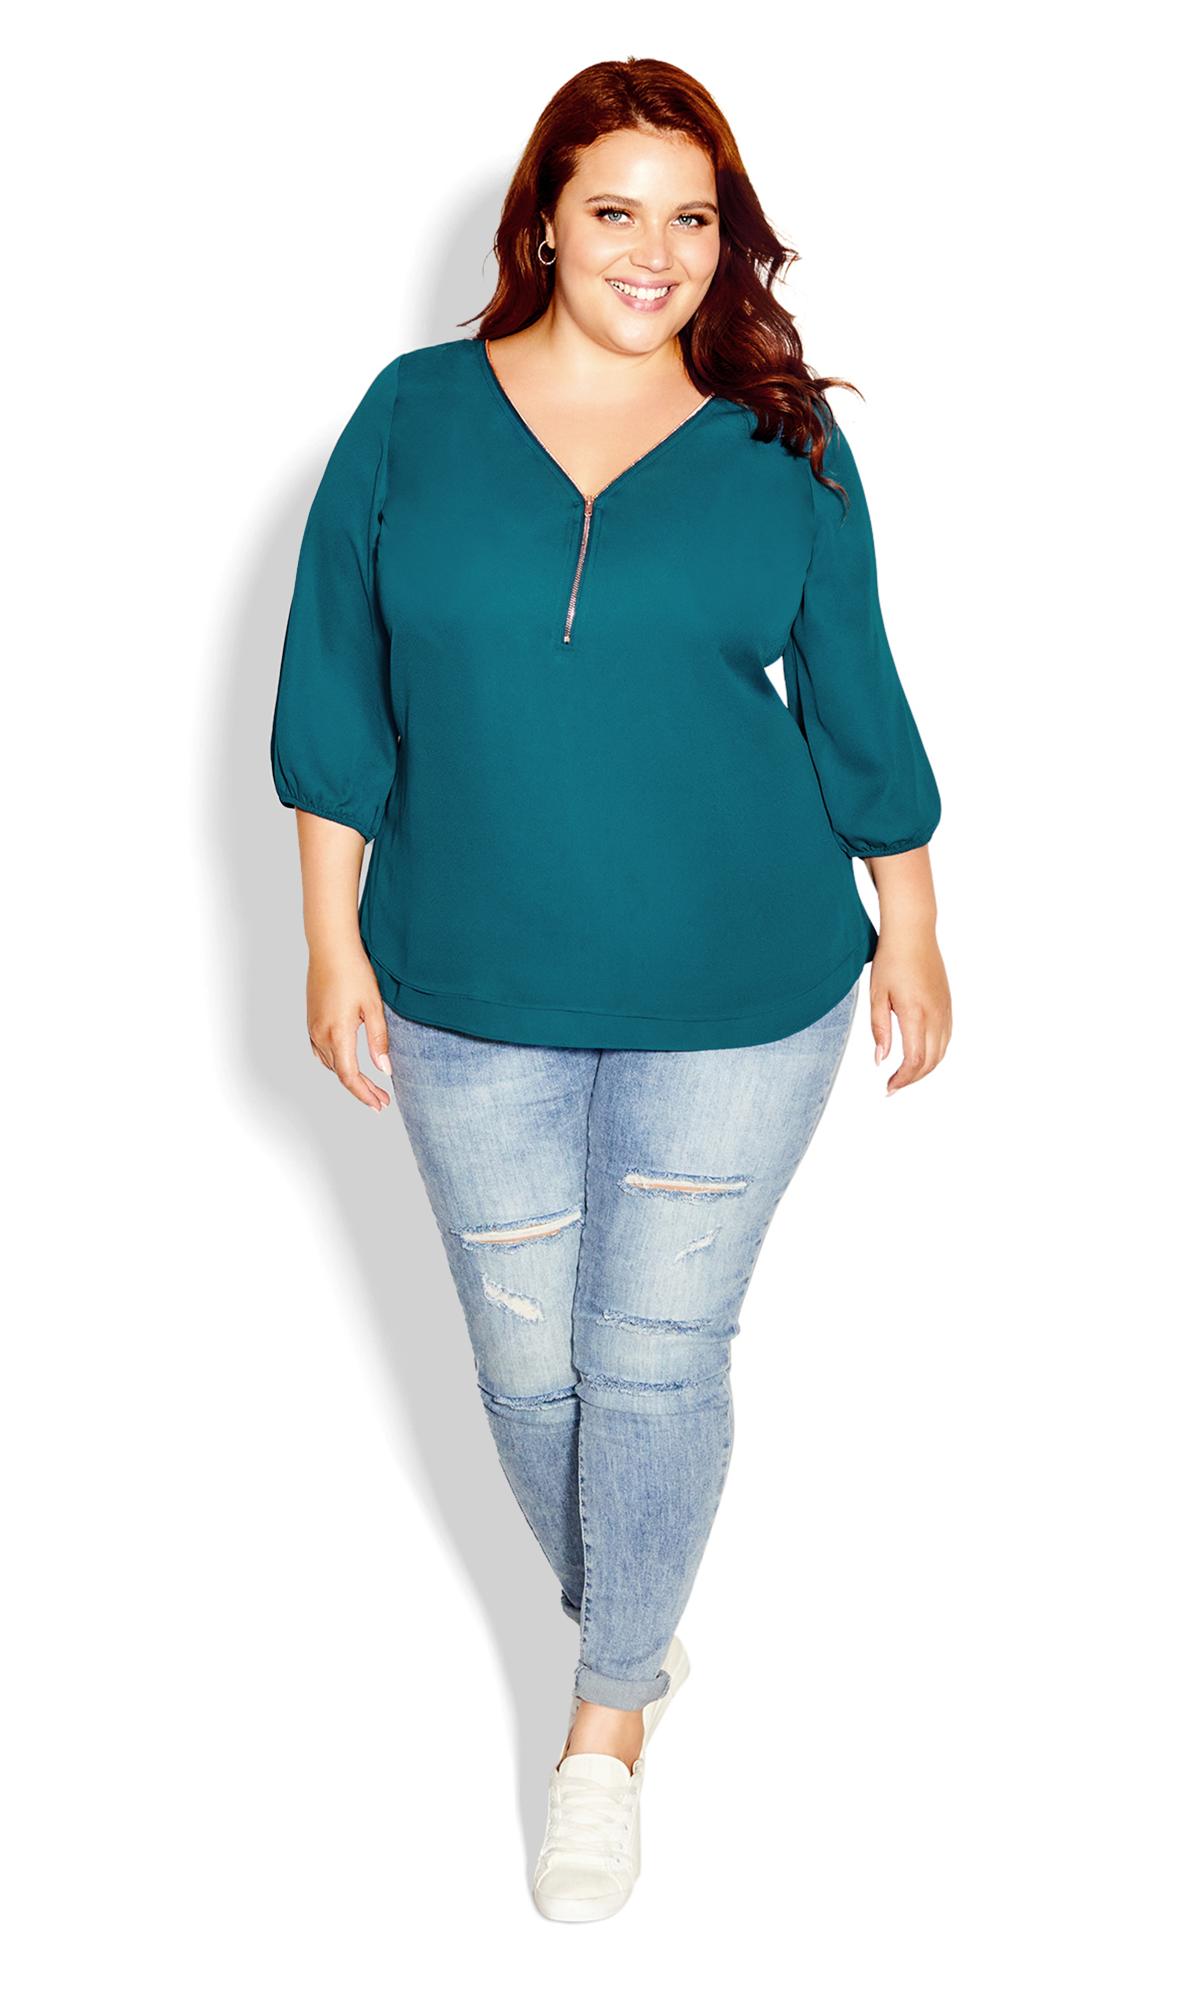 City Chic Teal Green Zip Front Blouse | Evans